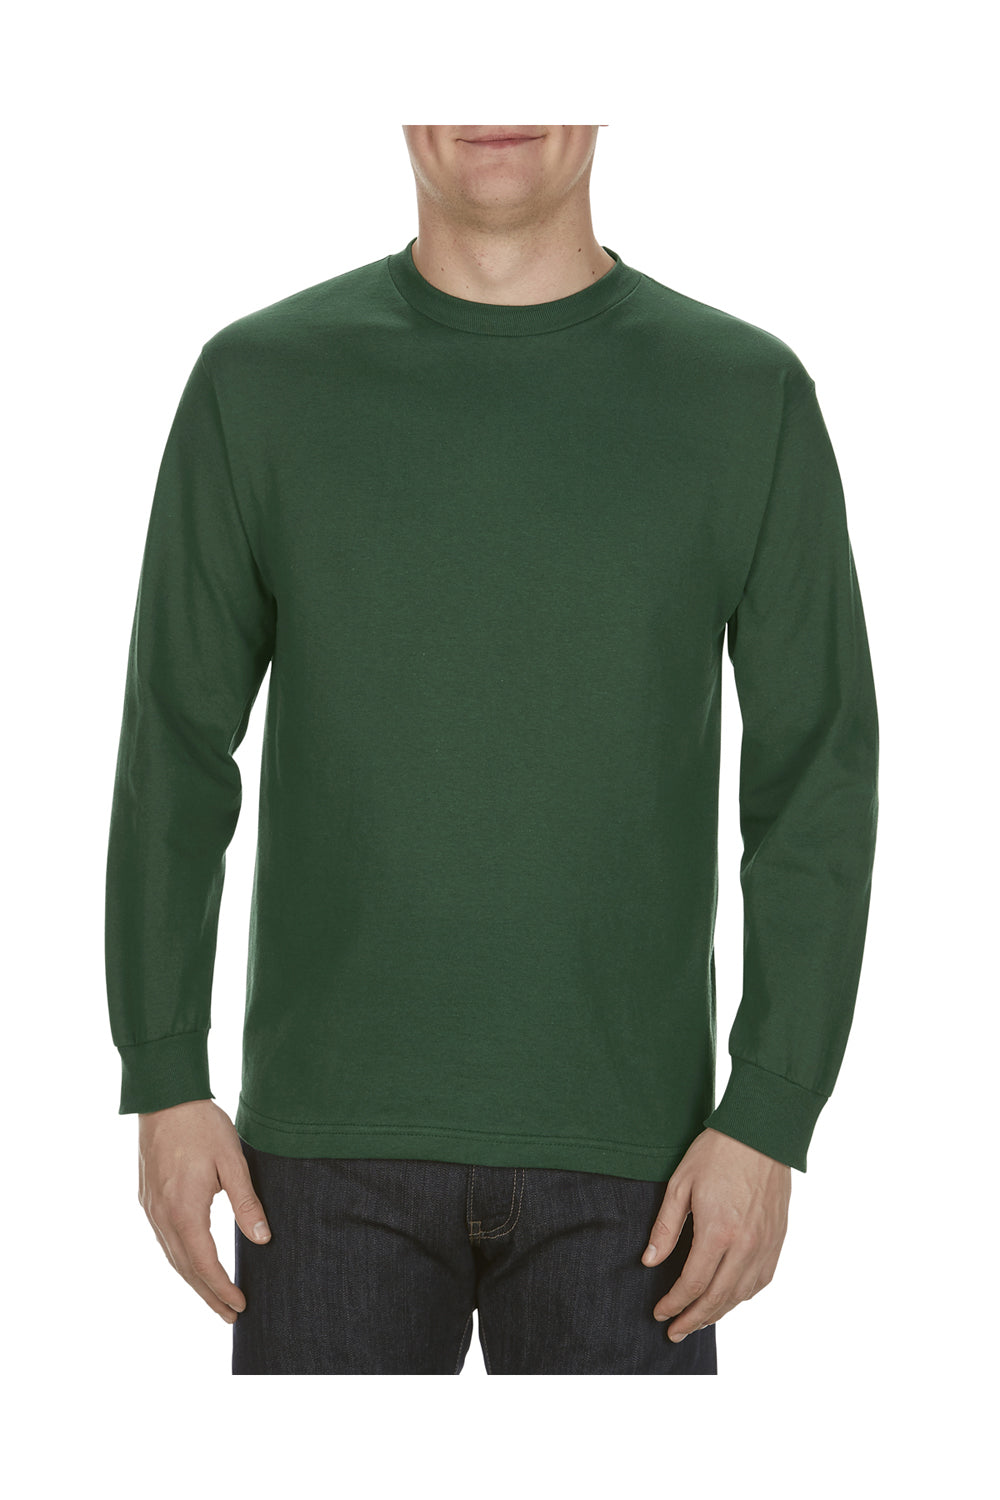 Alstyle AL1304 Mens Long Sleeve Crewneck T-Shirt Forest Green Front